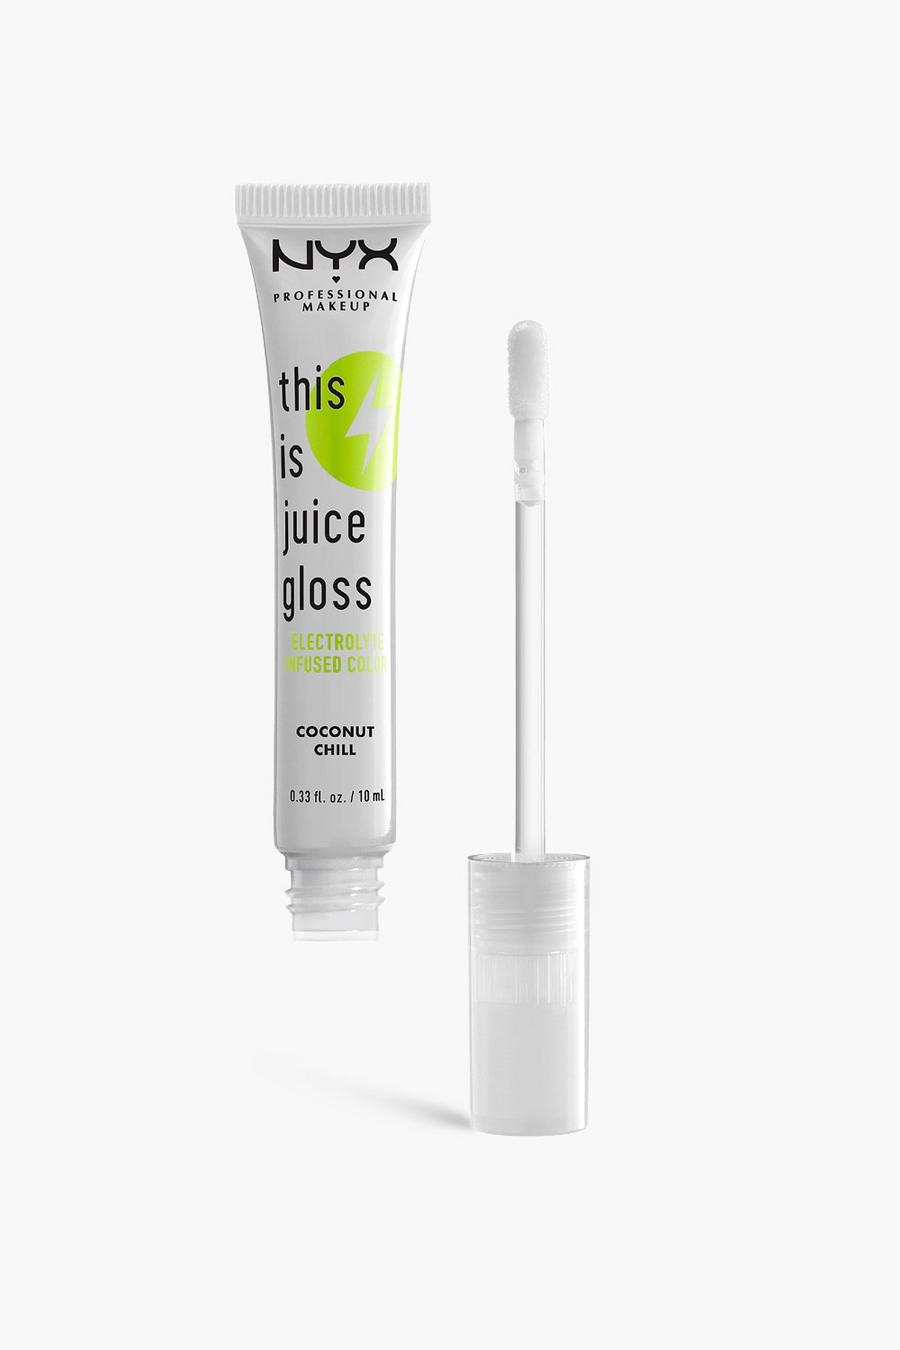 NYX Professional Makeup - Gloss - This Is Juice, 01 coconut chill image number 1